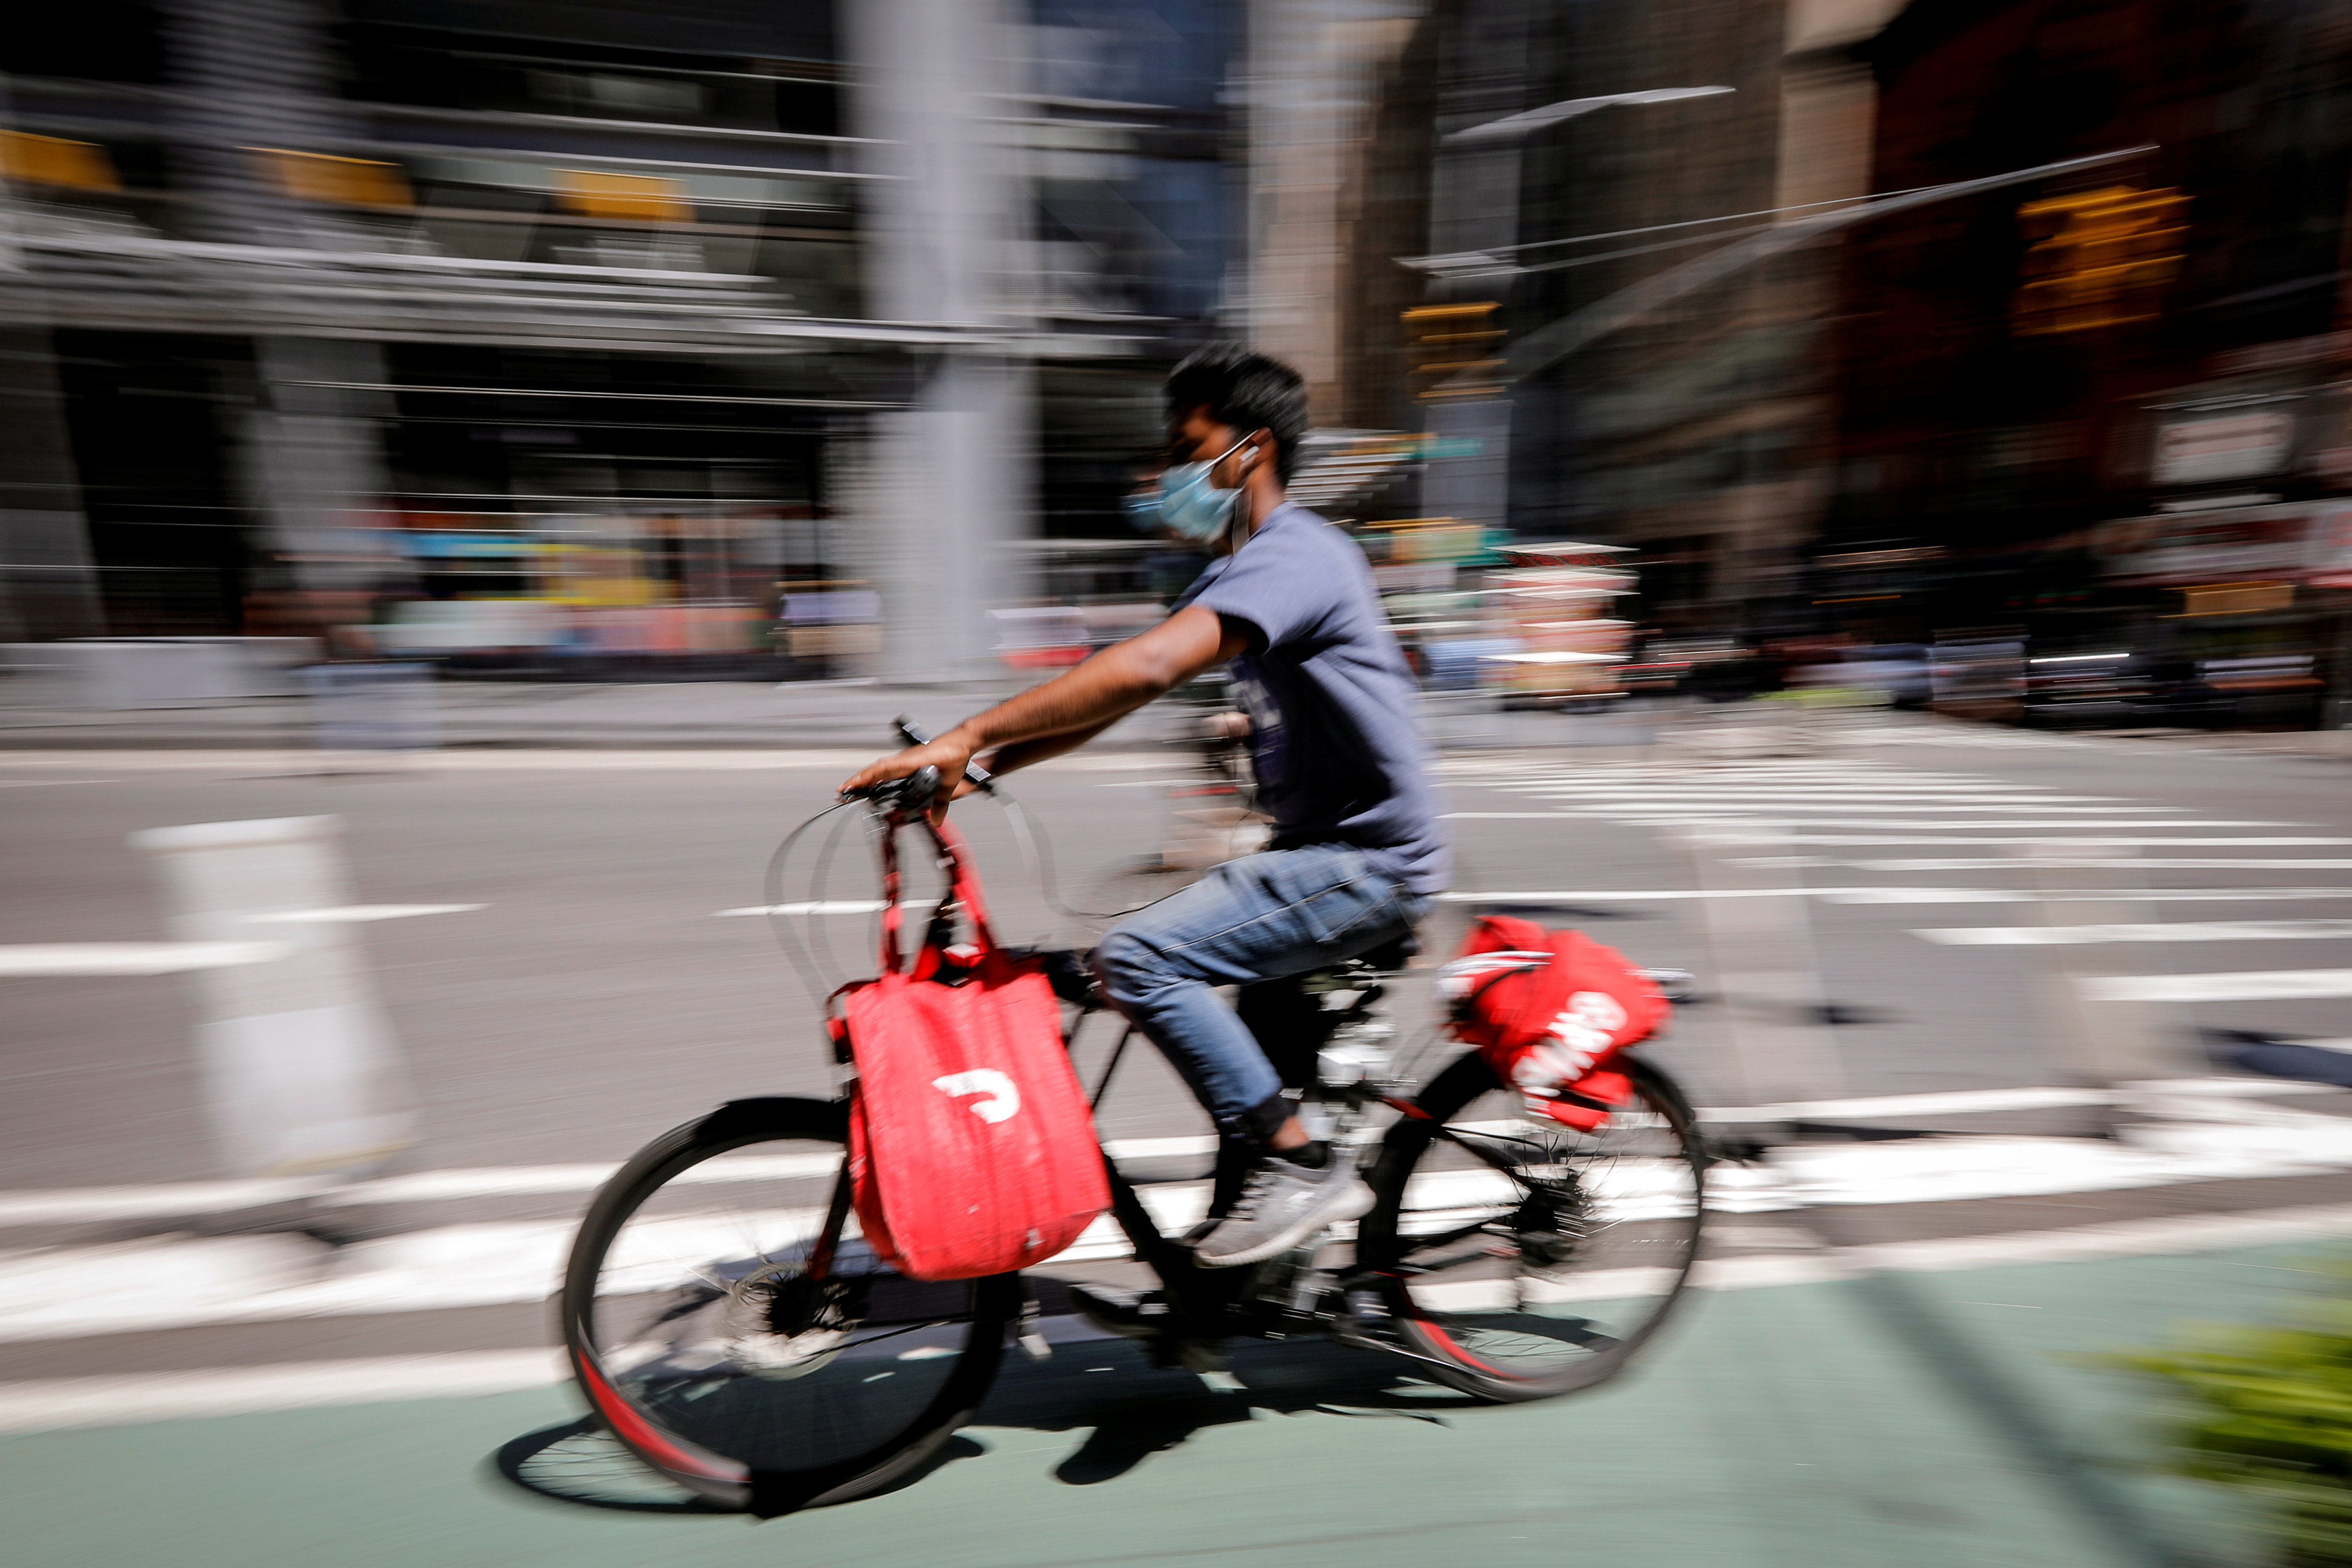 New York City sets an $18 per hour minimum wage for food delivery workers